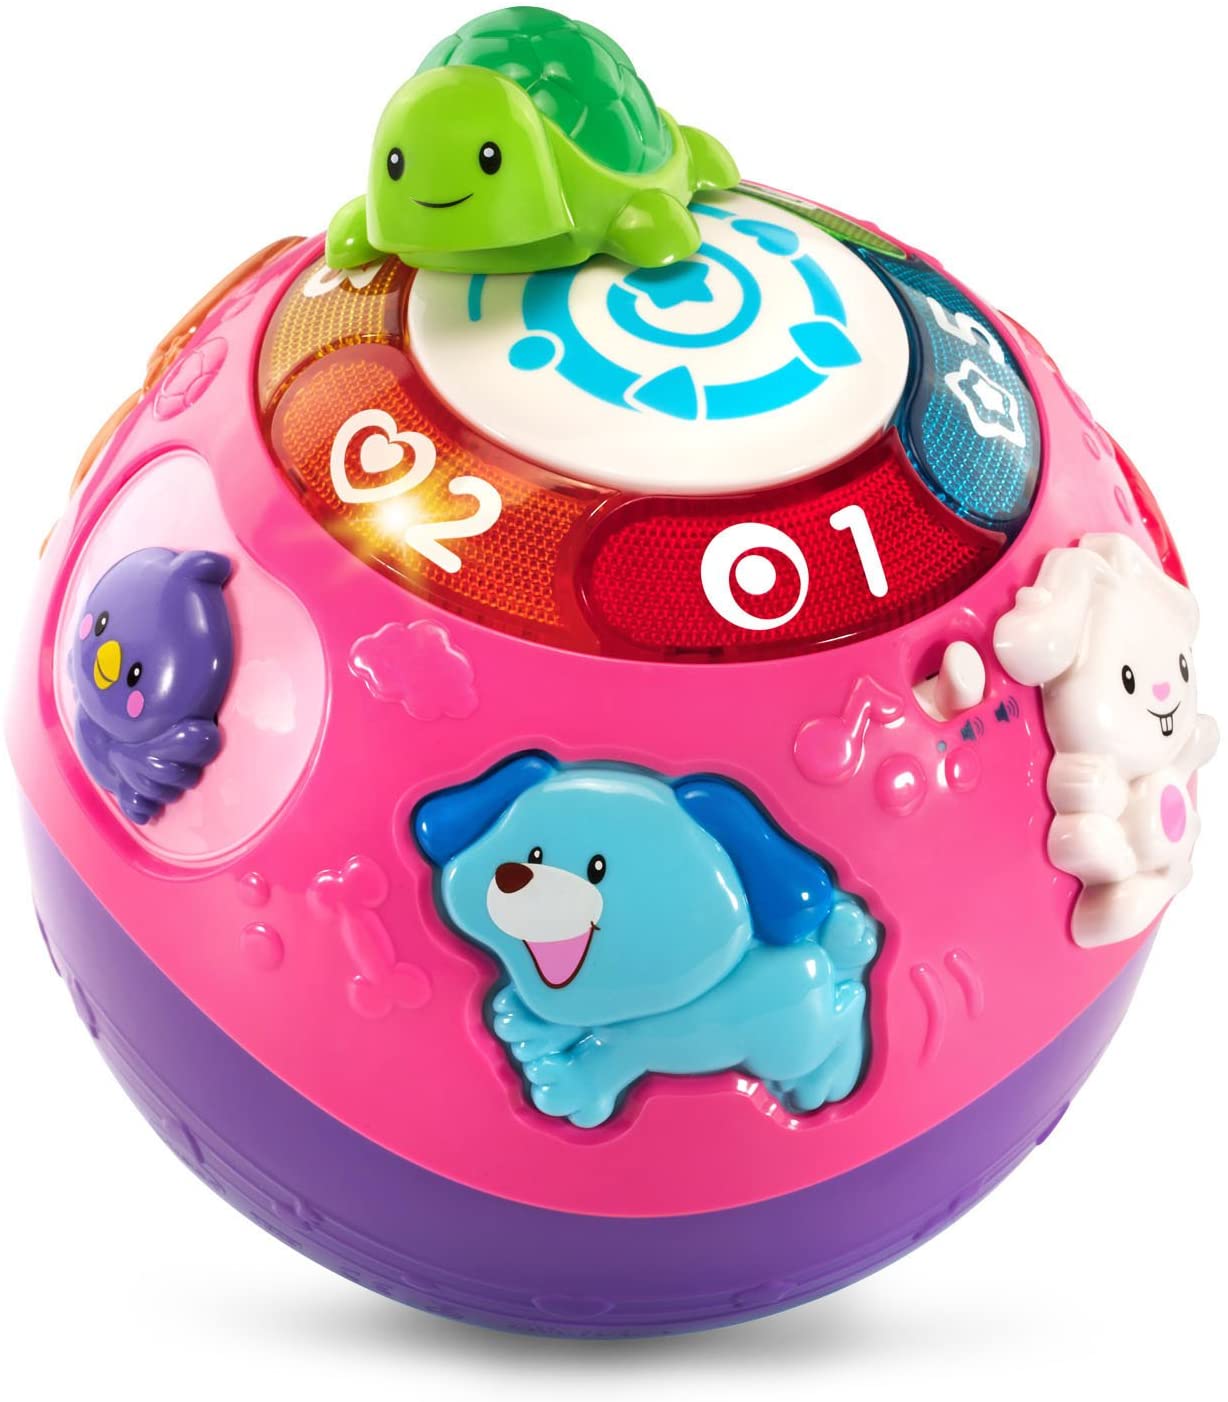 VTech Wiggle & Crawl Ball, Purple - with The Animal Friends